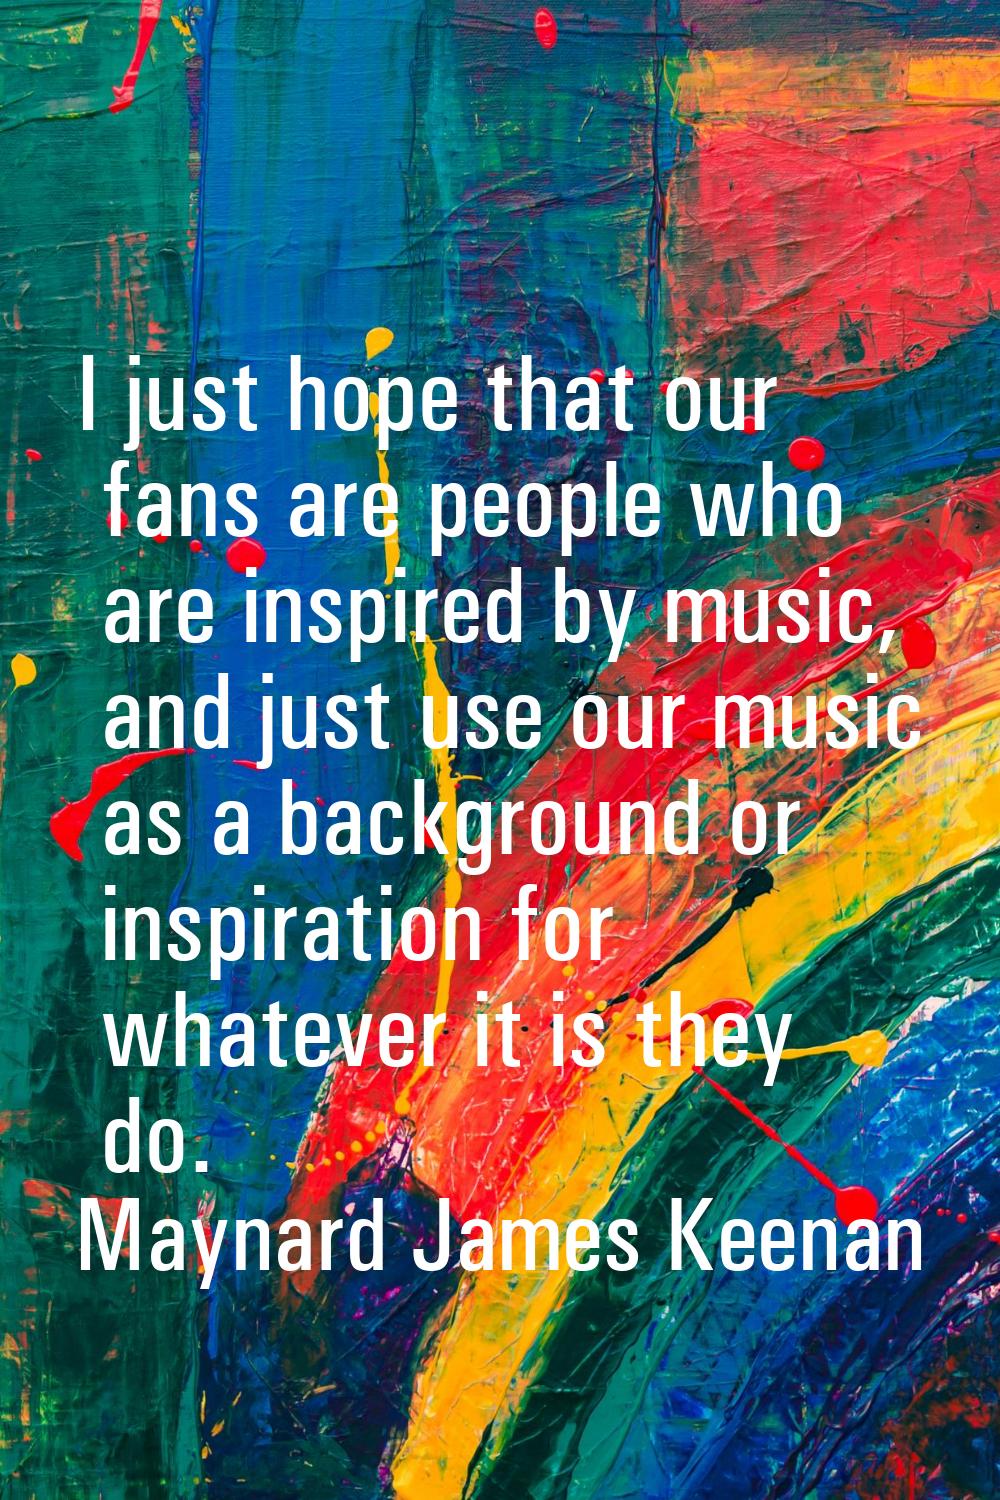 I just hope that our fans are people who are inspired by music, and just use our music as a backgro